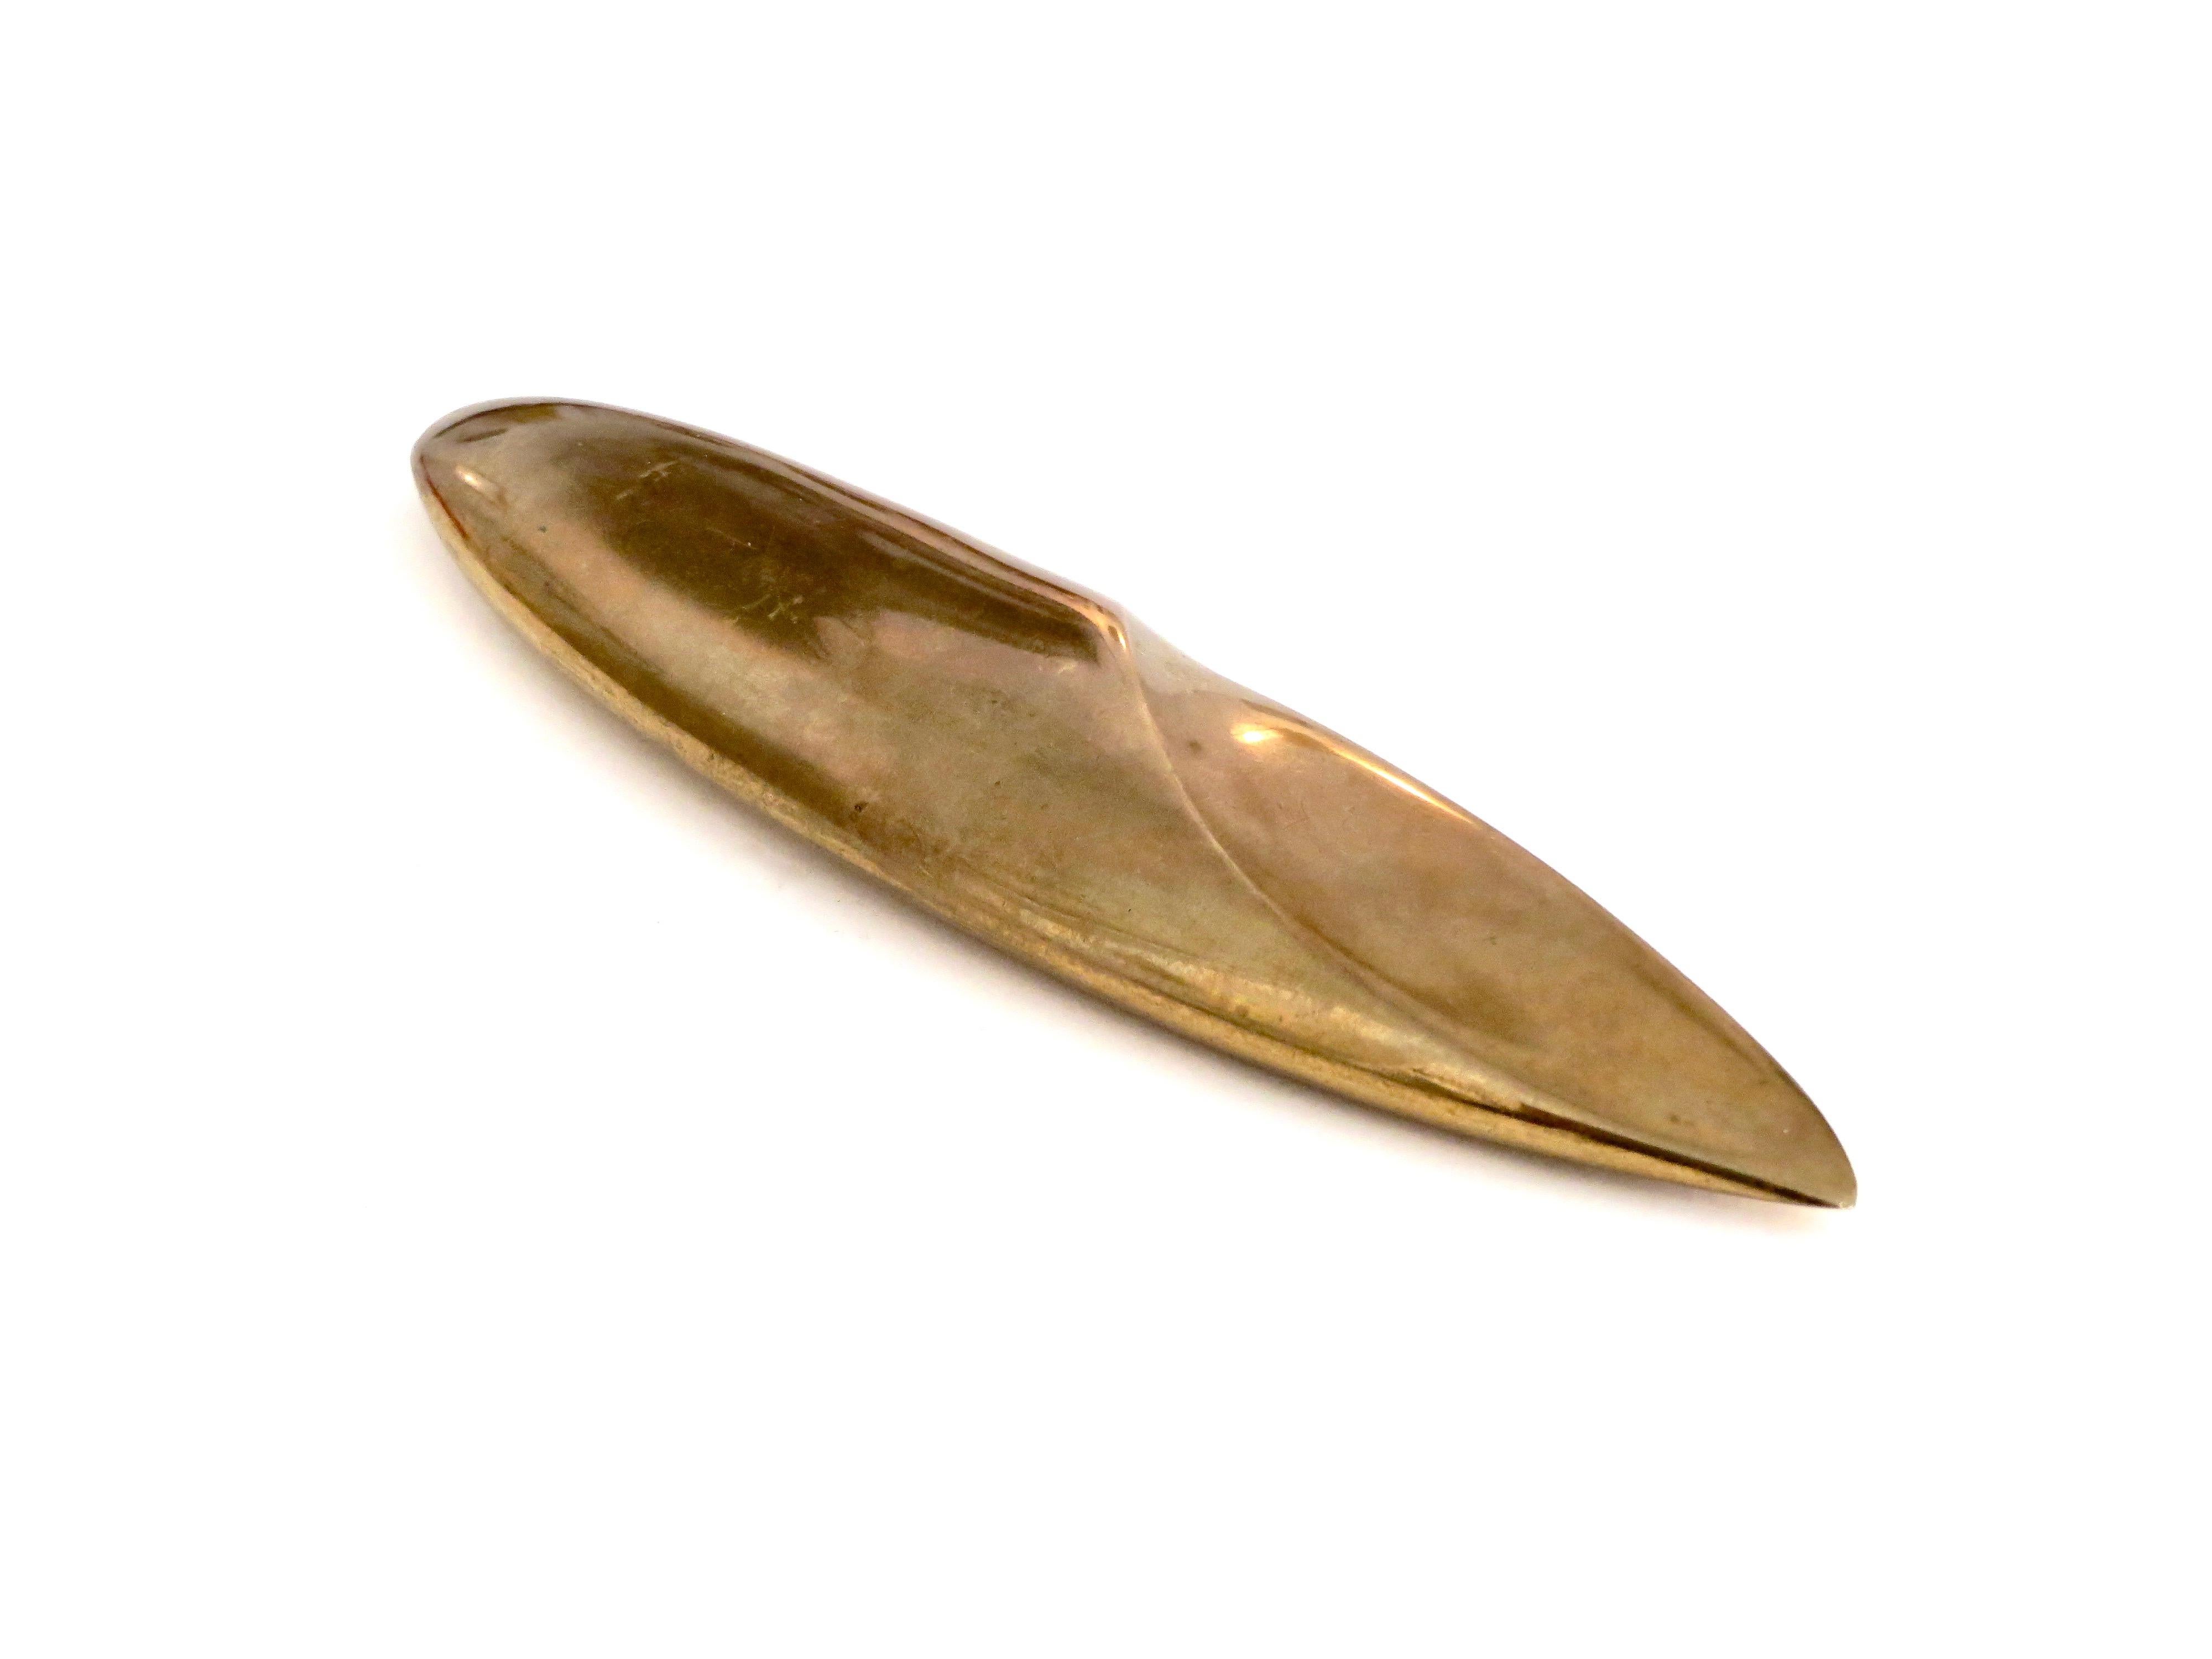 Monique Gerber bronze cast letter opener in a very sculptural and Minimalist form.
Can be used as a sculptural object or paper weight as well.
Reminiscent of a Brancusi form. 
Signed MG France.
Signs of use on the tip.
 